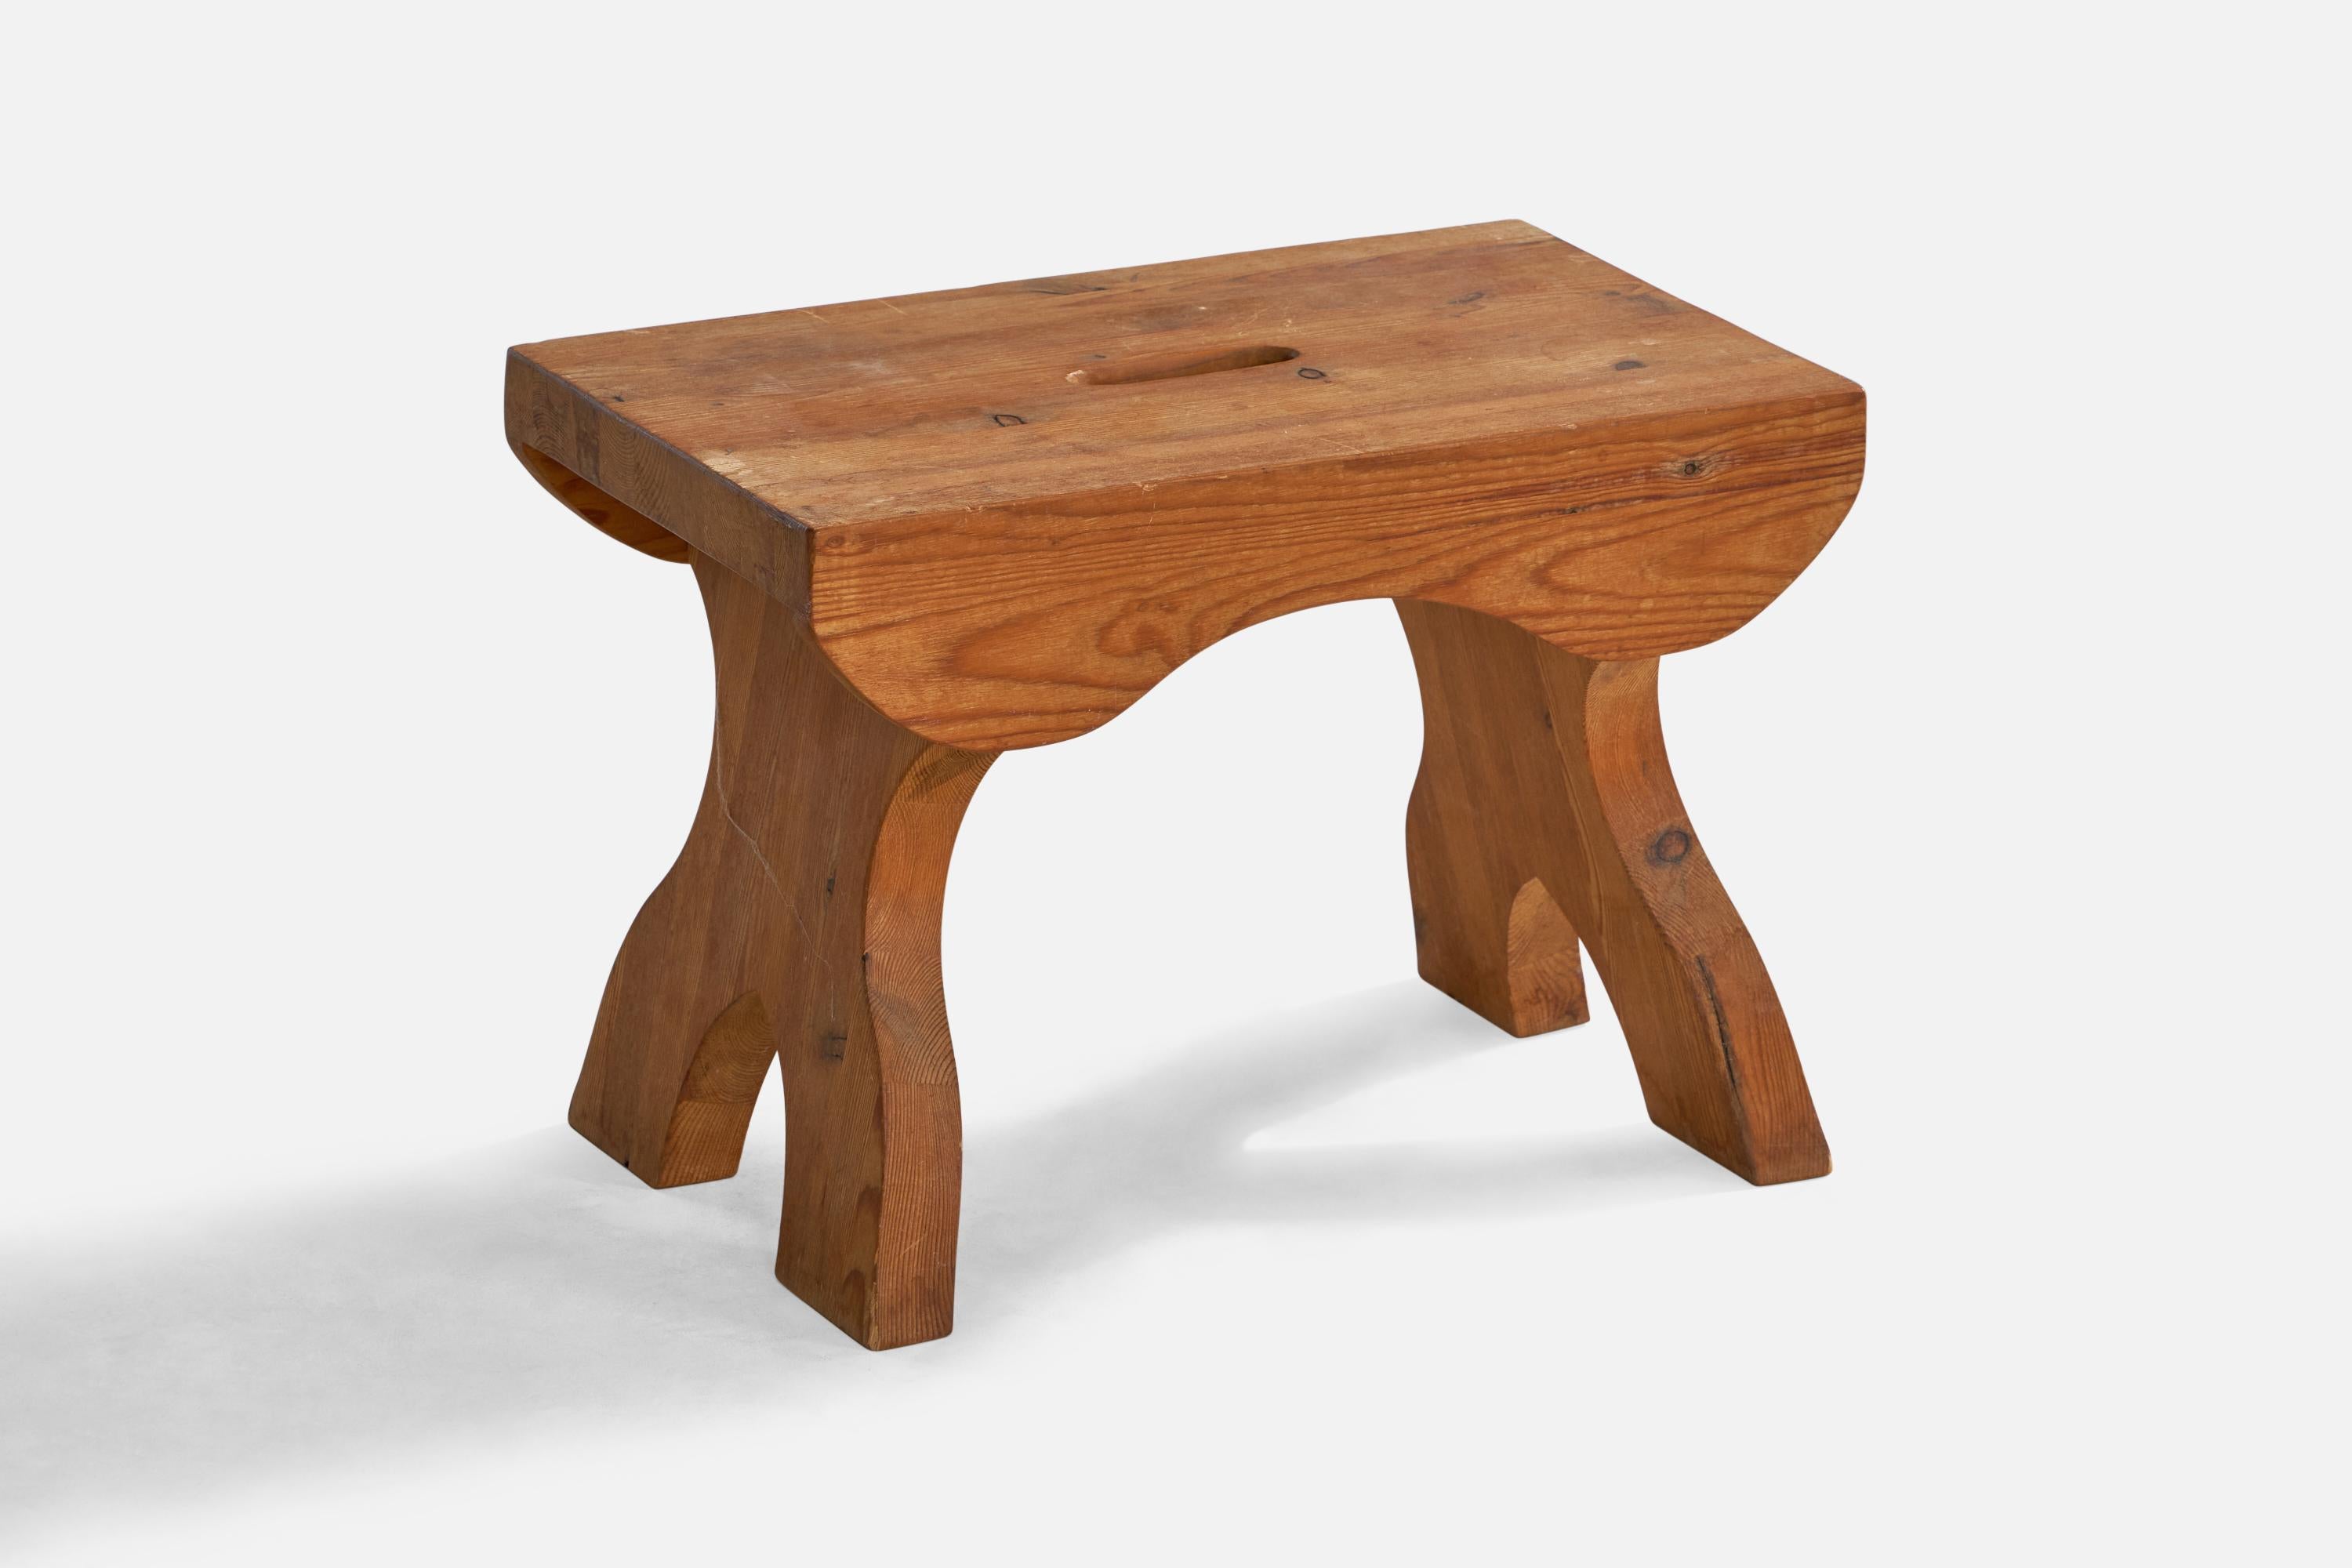 A pine stool designed and produced in Sweden, c. 1950s.

Seat height: 12.7”